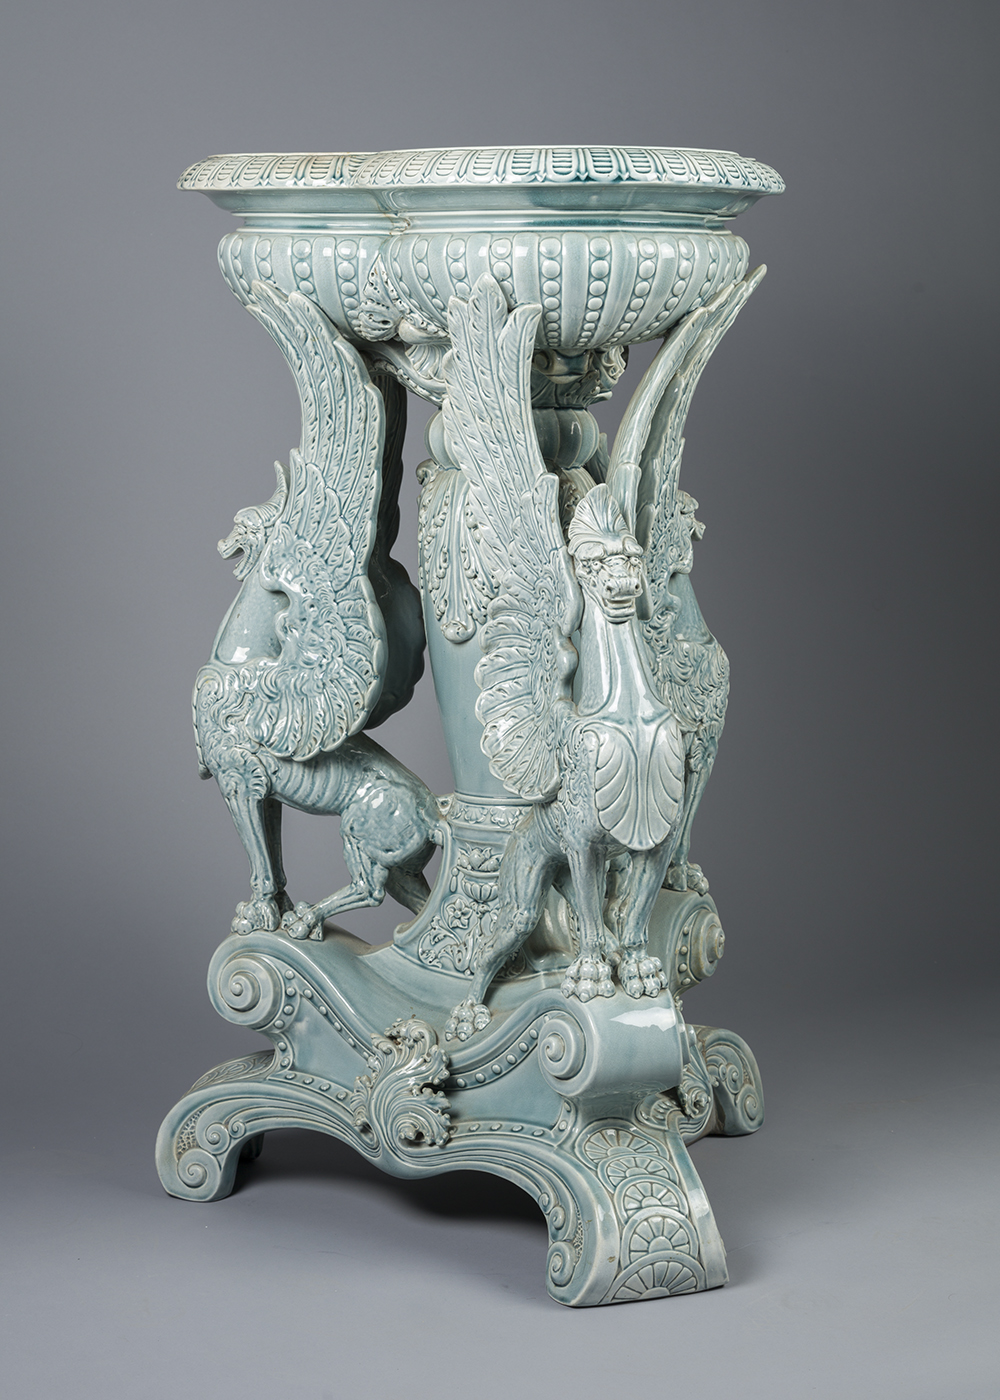 Jade colored majolica fern stand with three griffin supports and pedestal base.